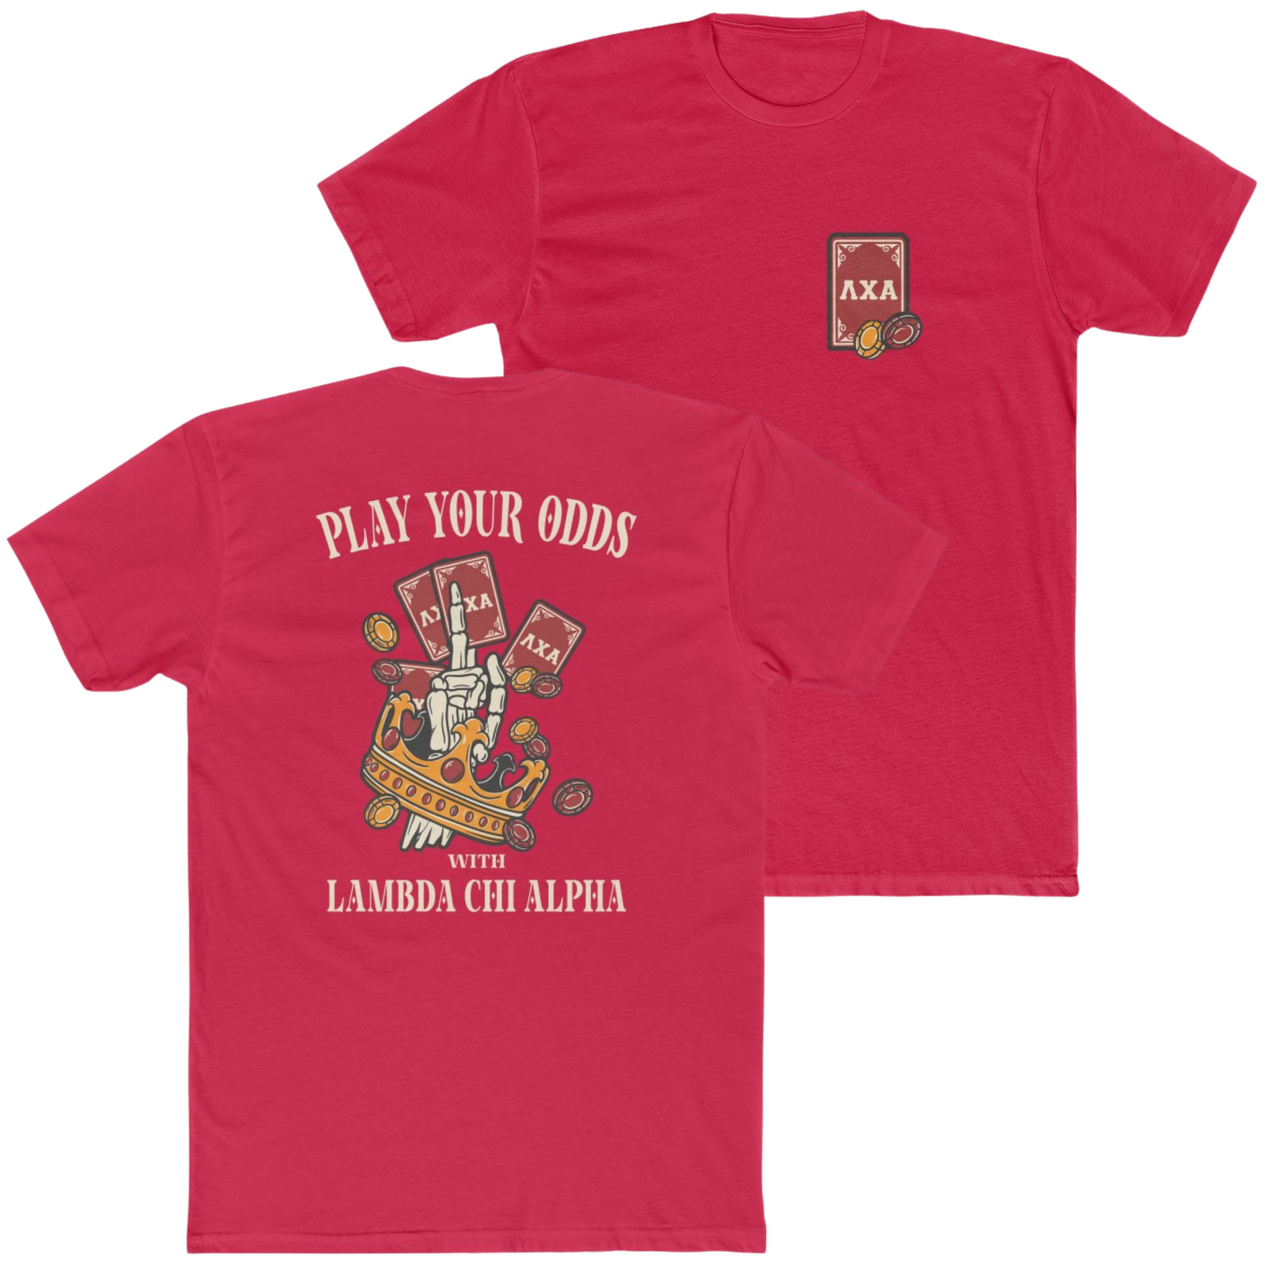 Red Lambda Chi Alpha Graphic T-Shirt | Play Your Odds | Lambda Chi Alpha Fraternity Apparel 